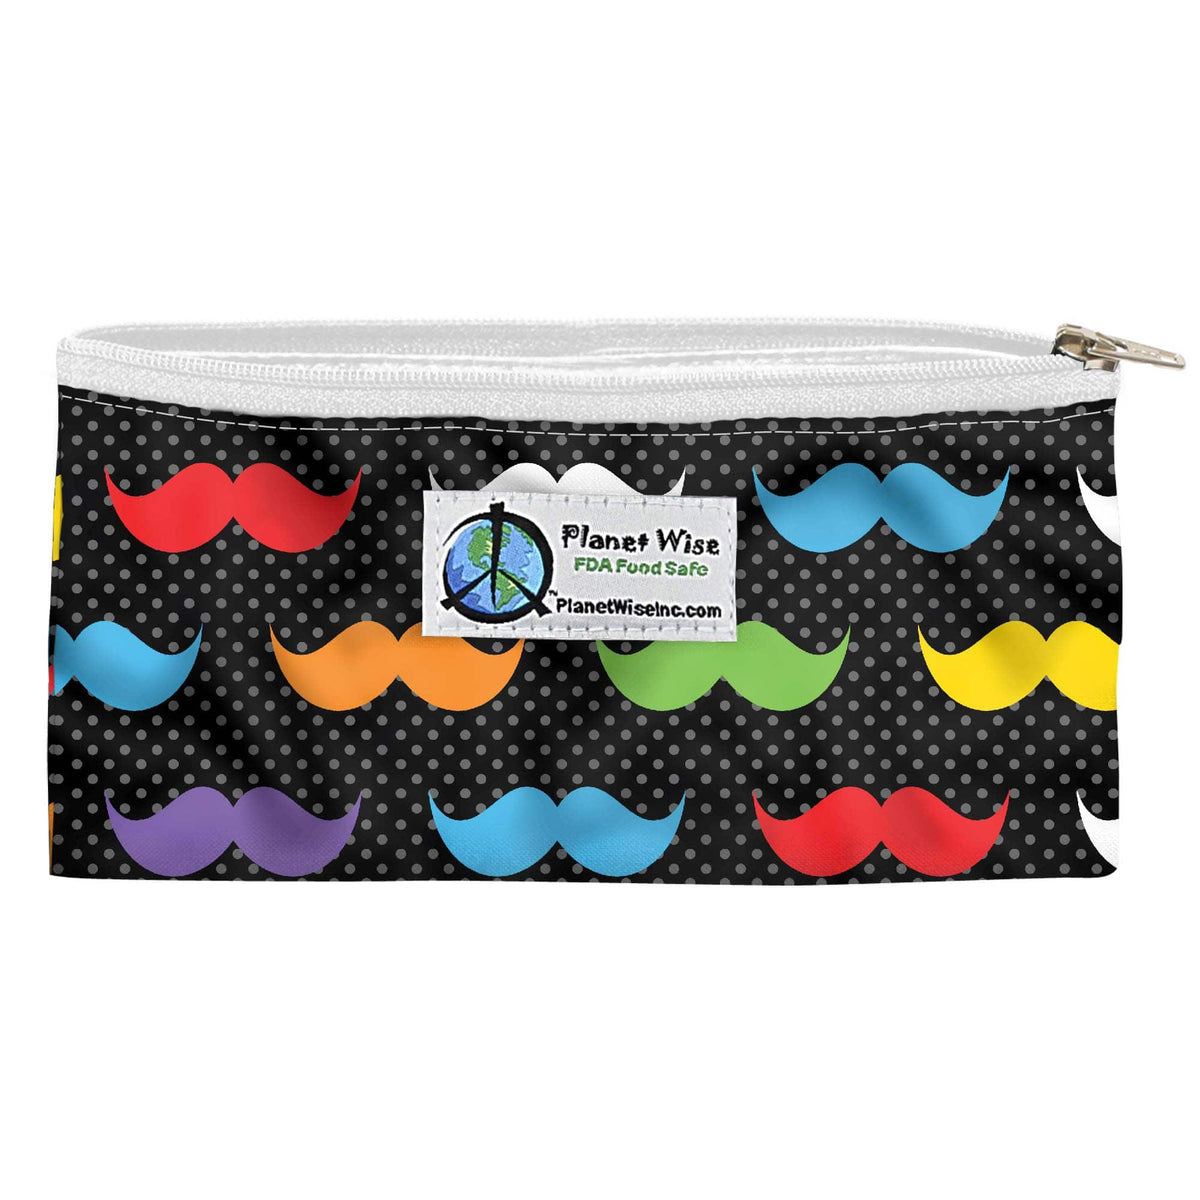 CLEARANCE: Planet Wise Reusable Printed Zipper Snack Bag